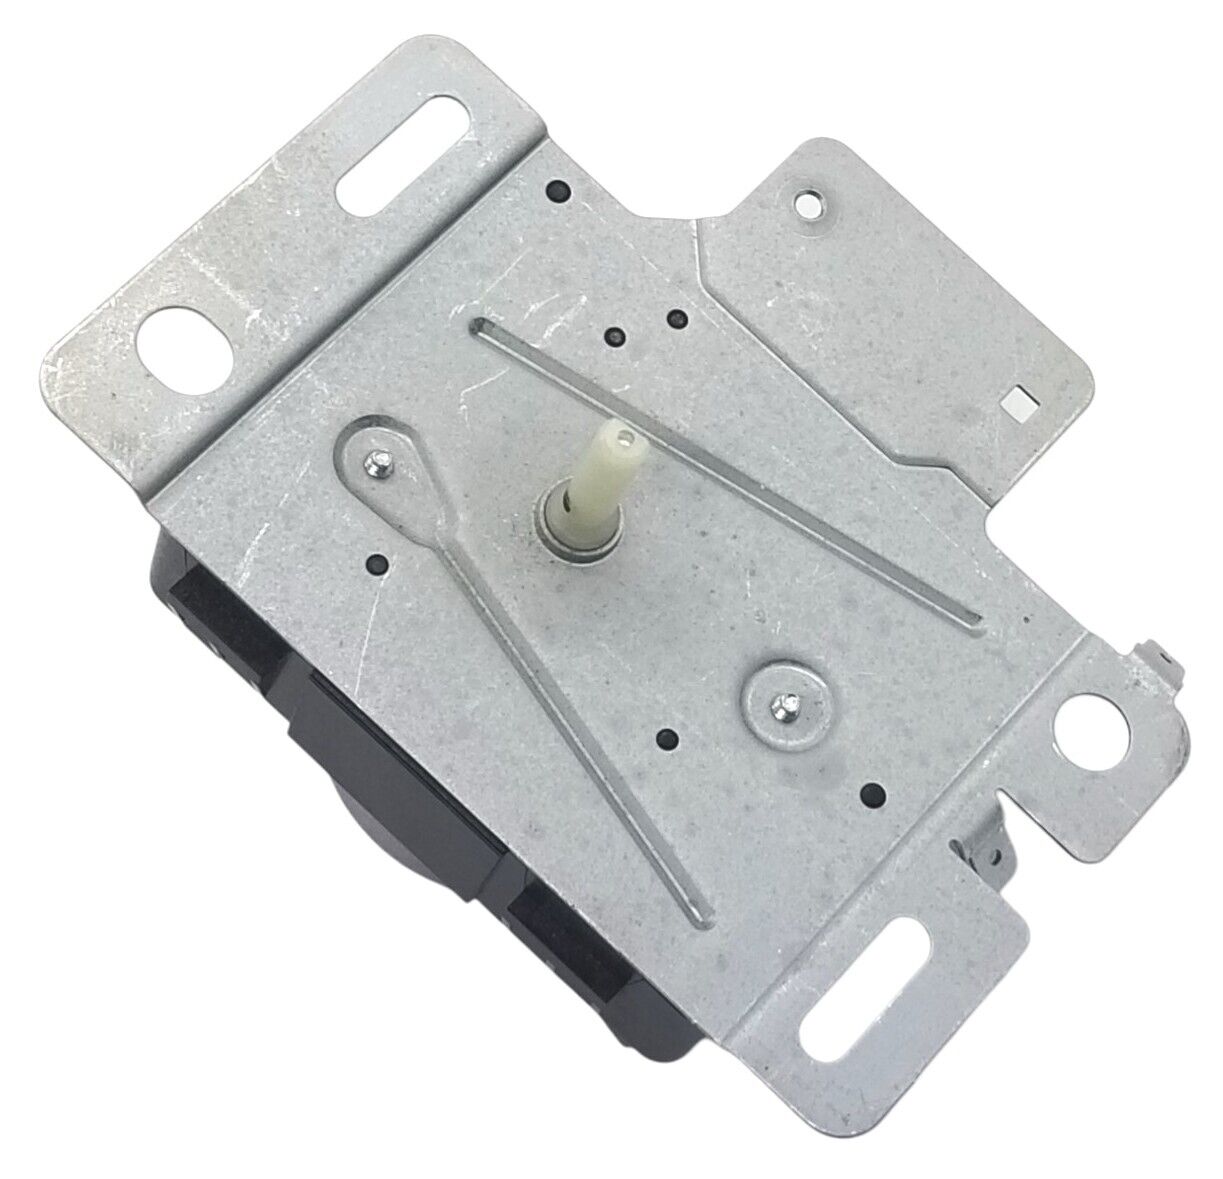 Genuine OEM Replacement for Maytag Dryer Timer W10648592